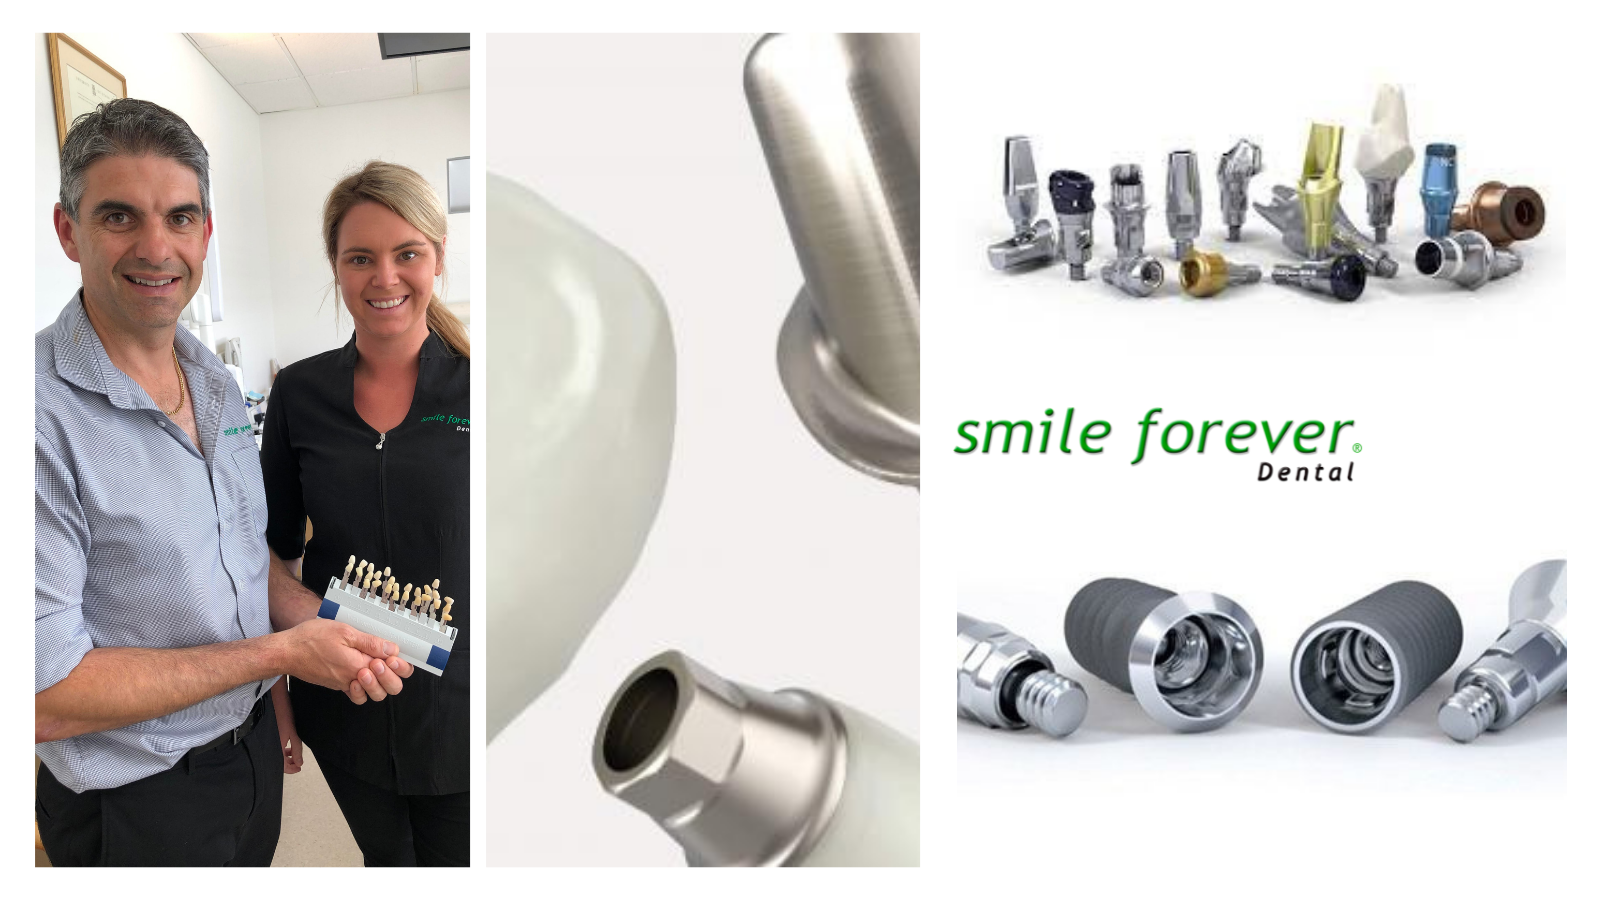 Pure titanium dental implants at Smile Forever Dental are the best